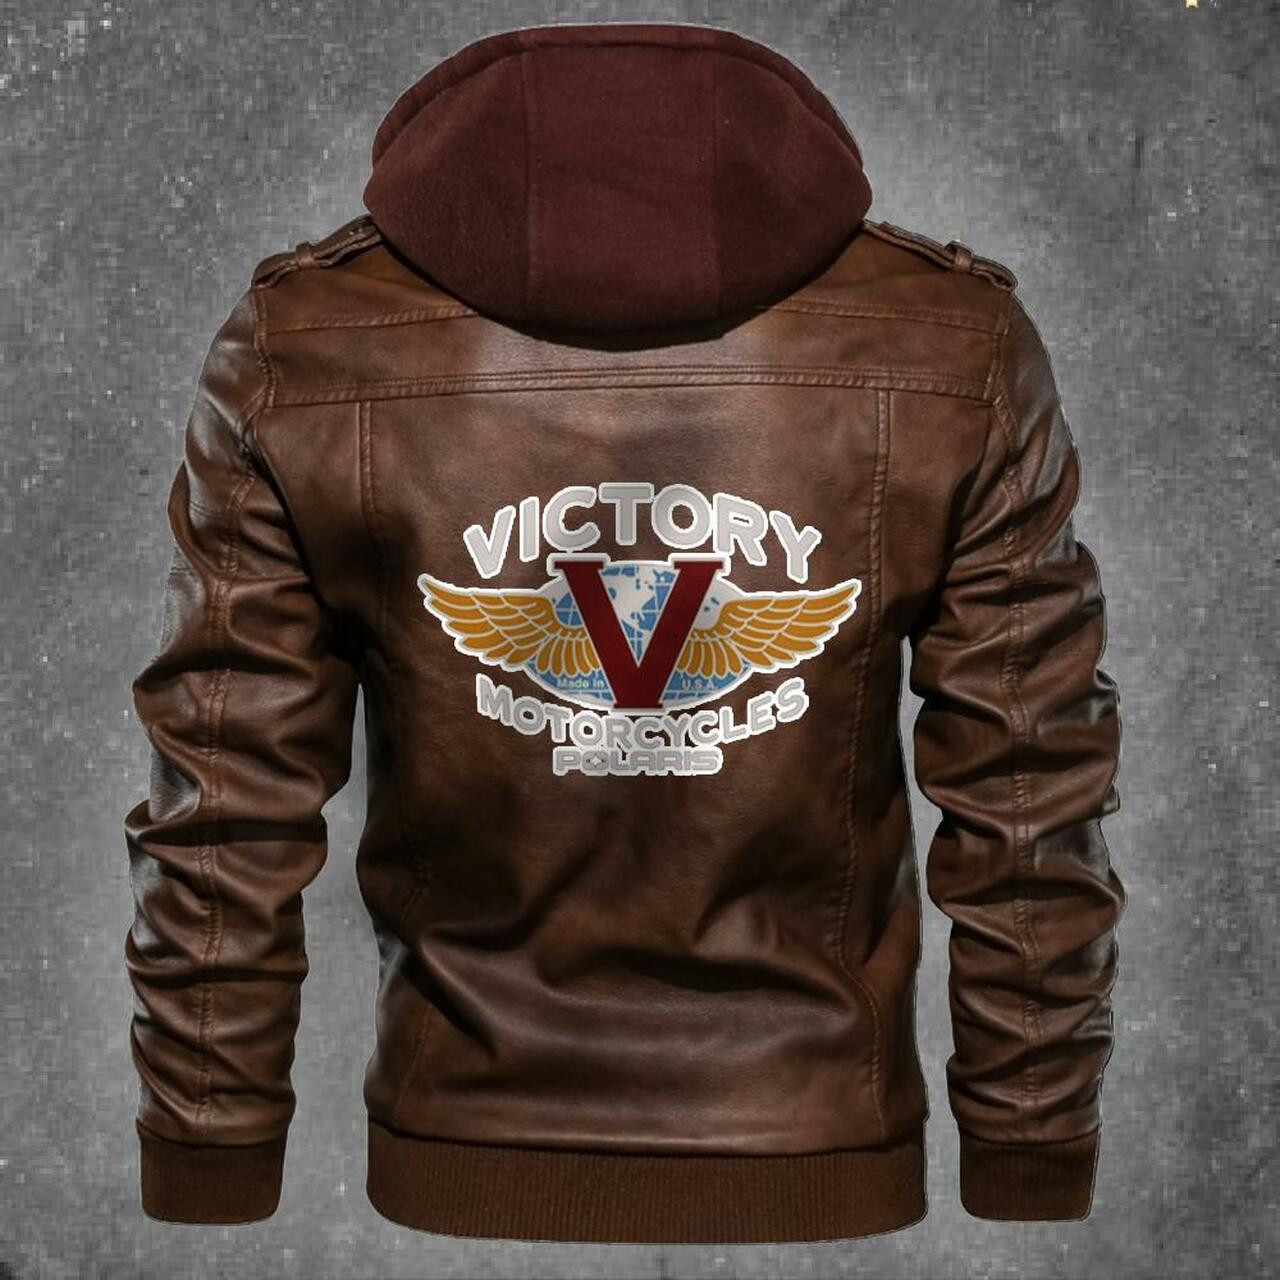 Our store has all of the latest leather jacket 159